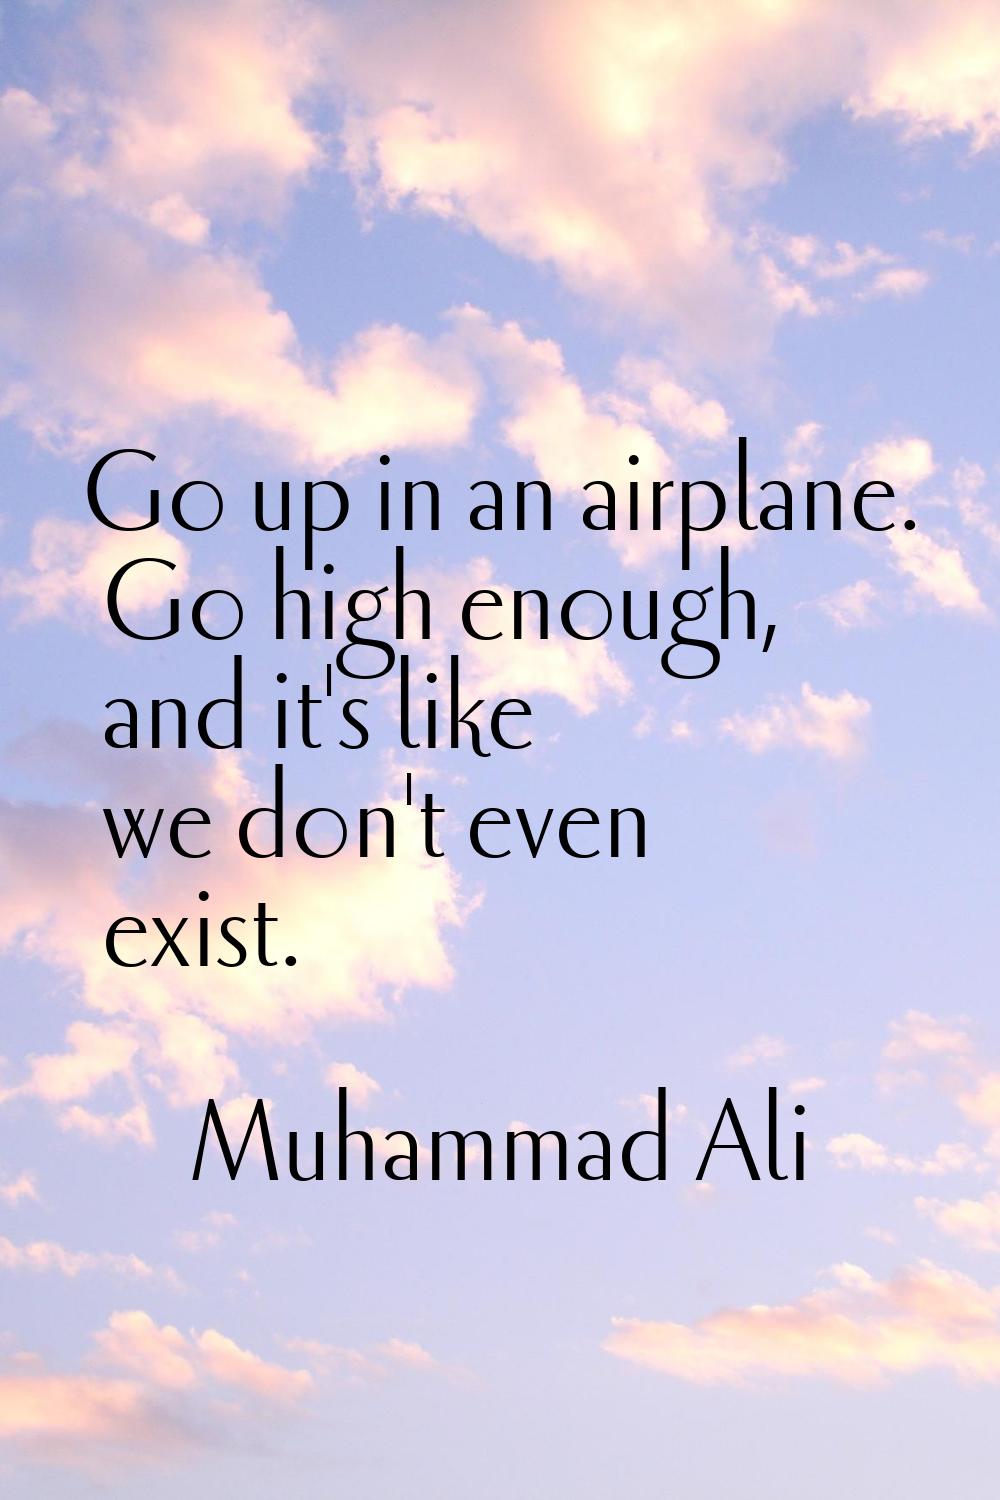 Go up in an airplane. Go high enough, and it's like we don't even exist.